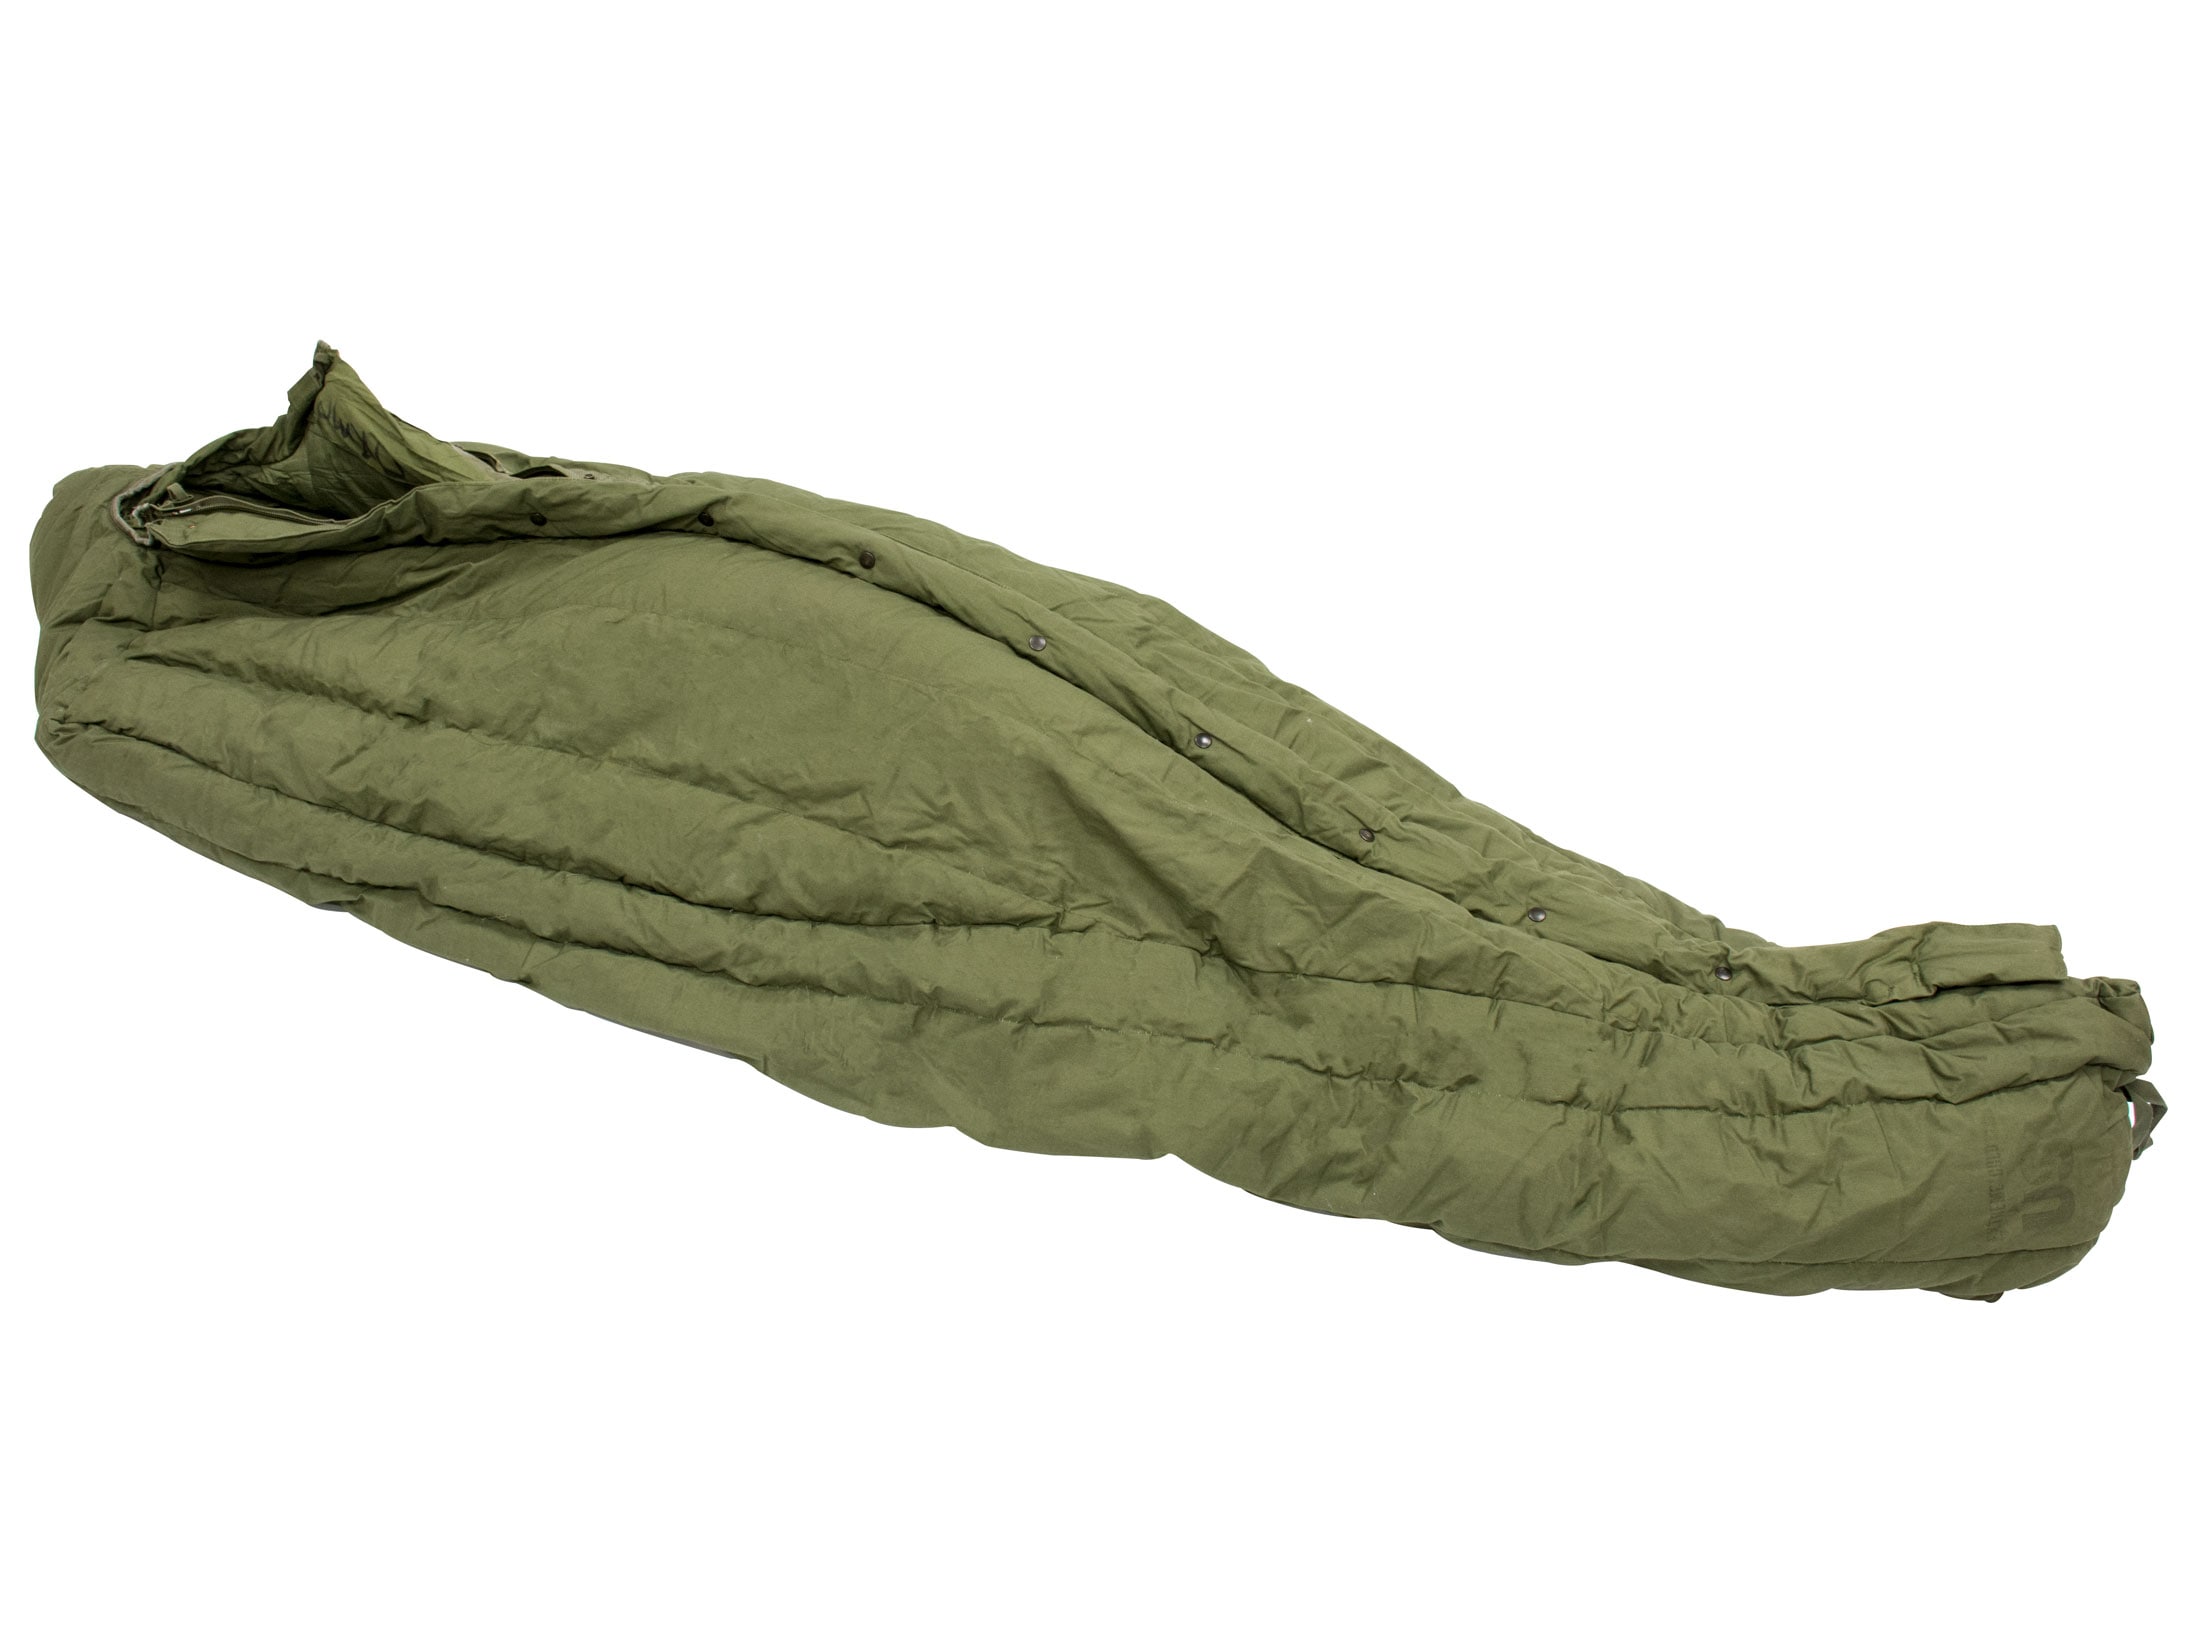 extreme cold weather mattress sleeping bags review